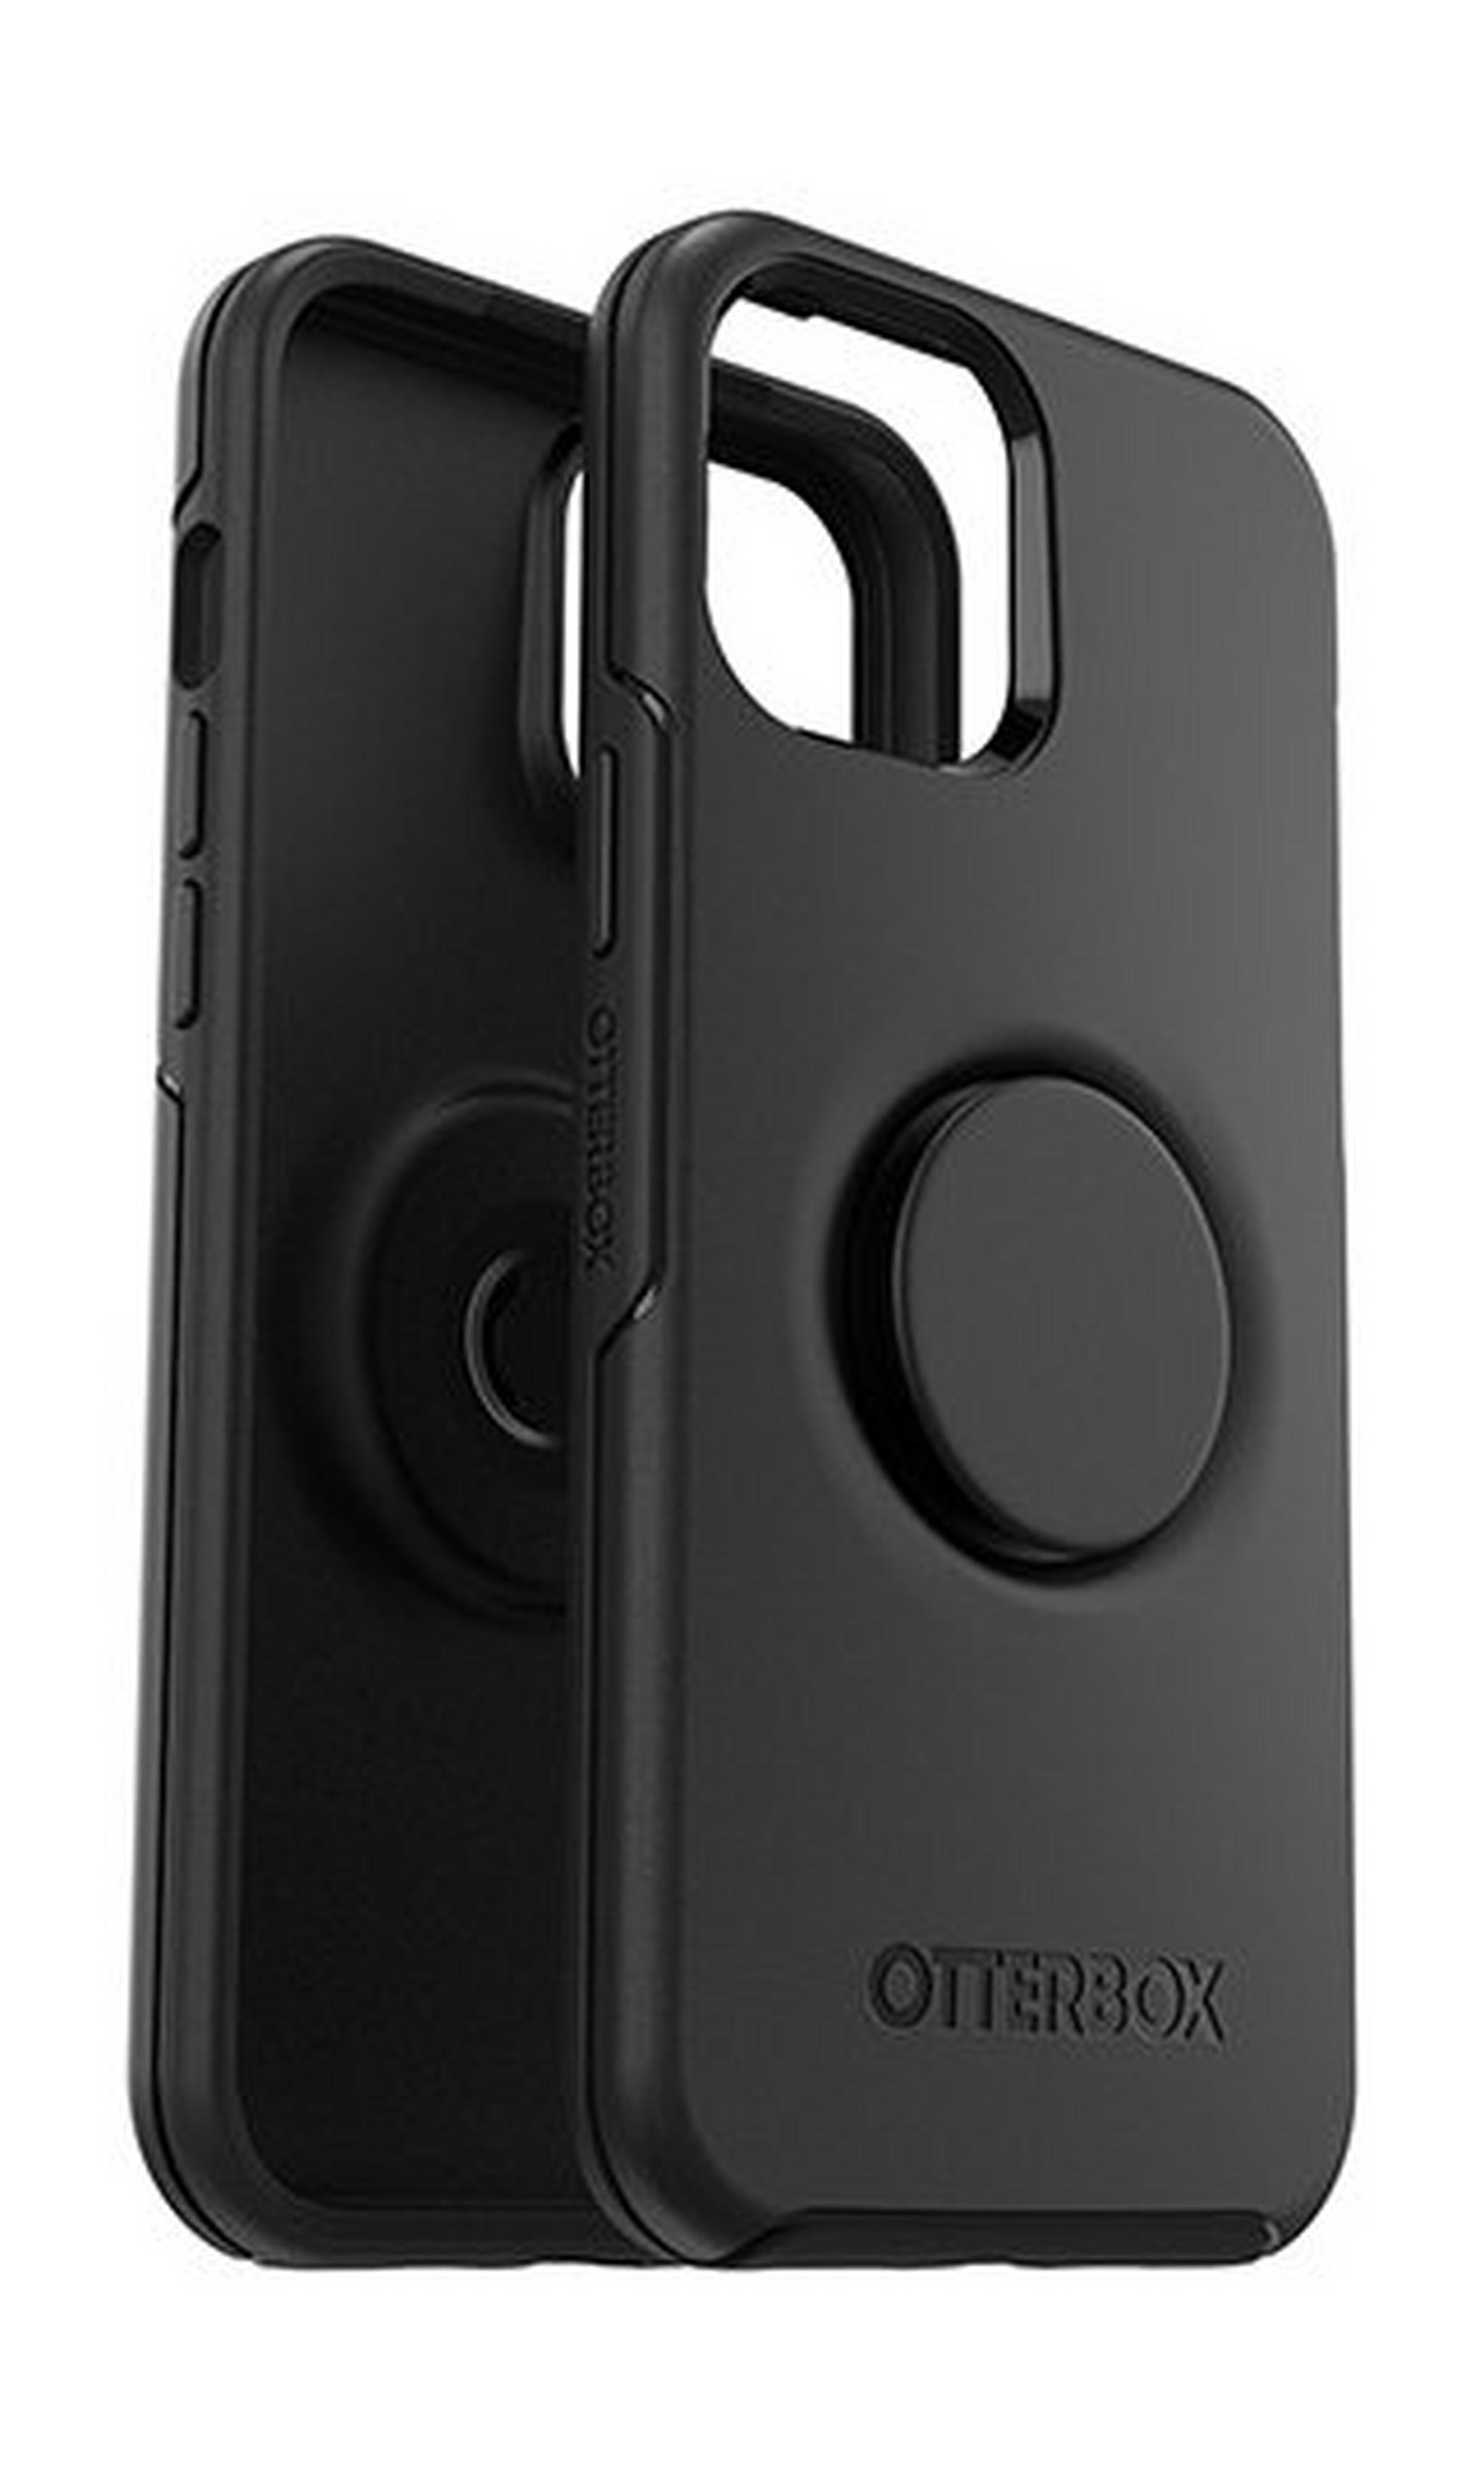 Otterbox iPhone 12 Pro Max Otter  Case with Pop Symmetry Grip - Black